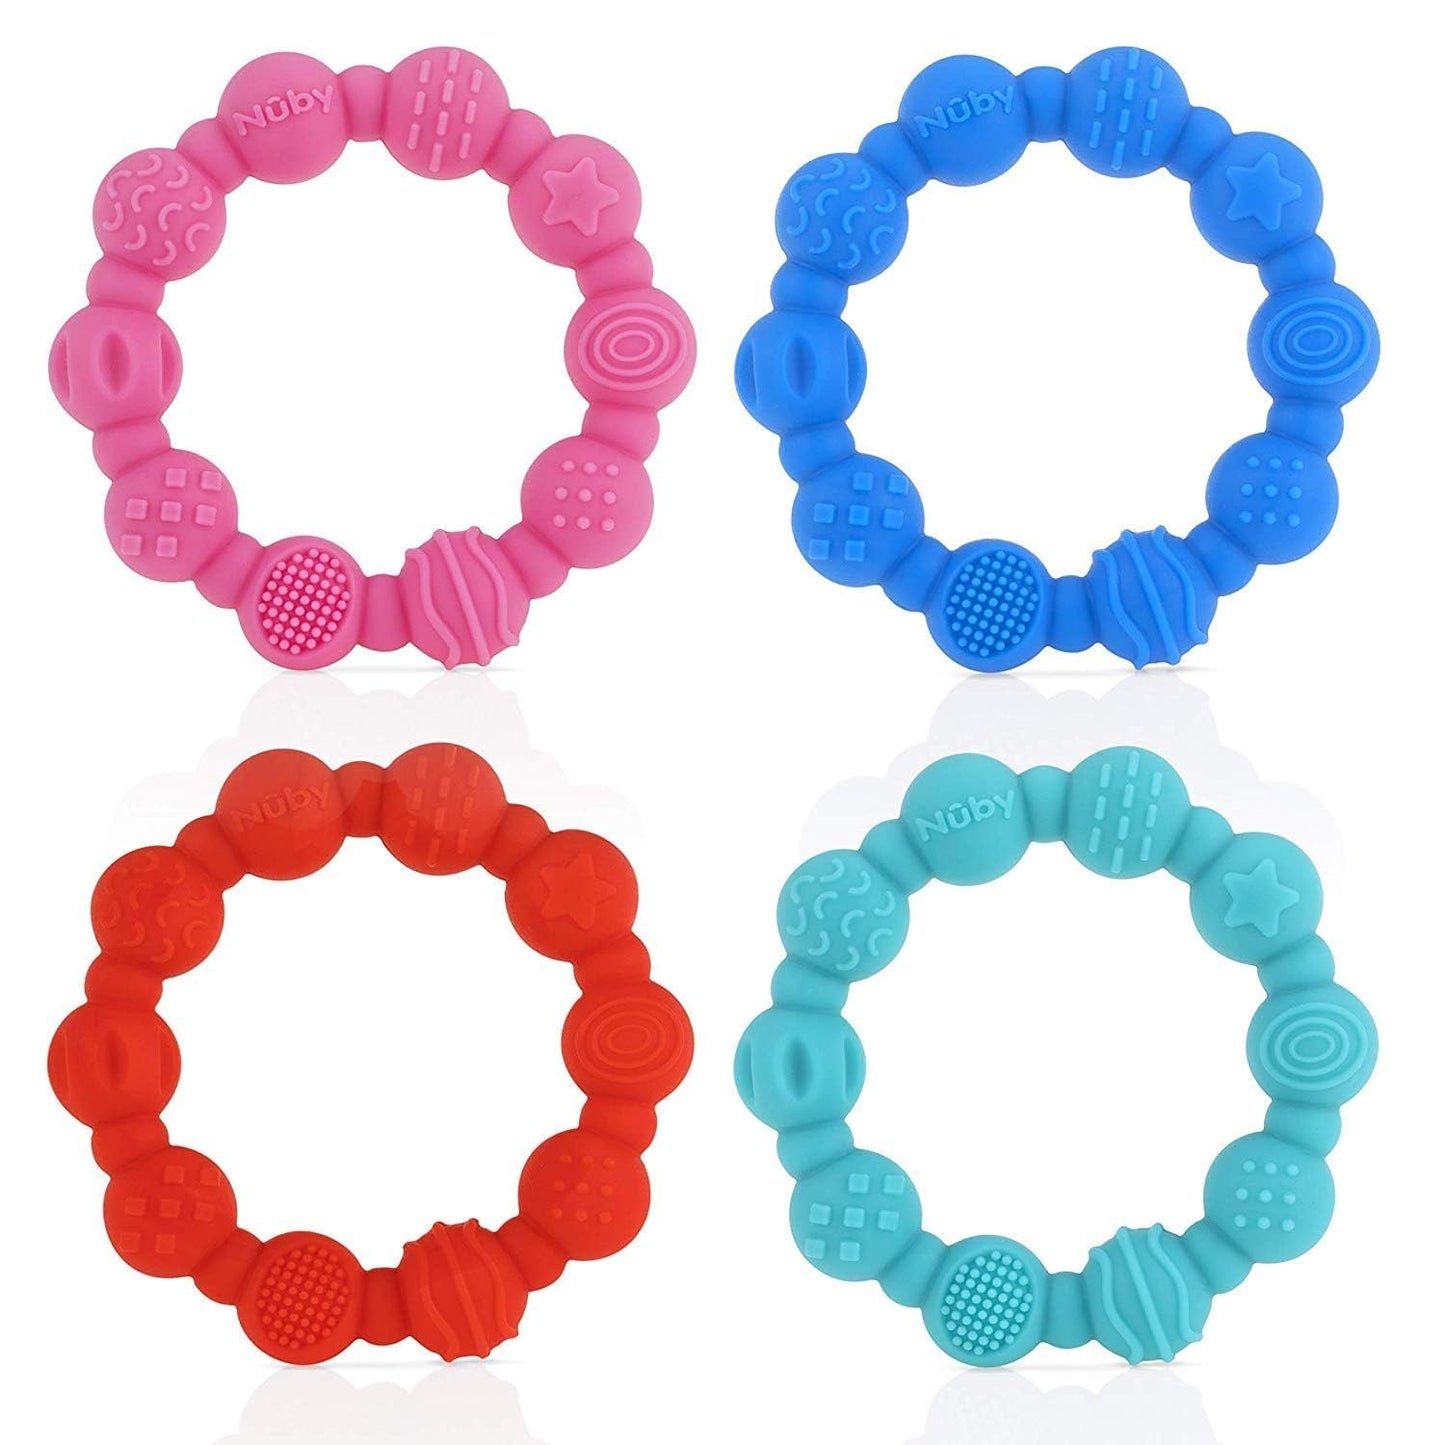 100% Silicone Teether Ring, 3 Months + (Blue)